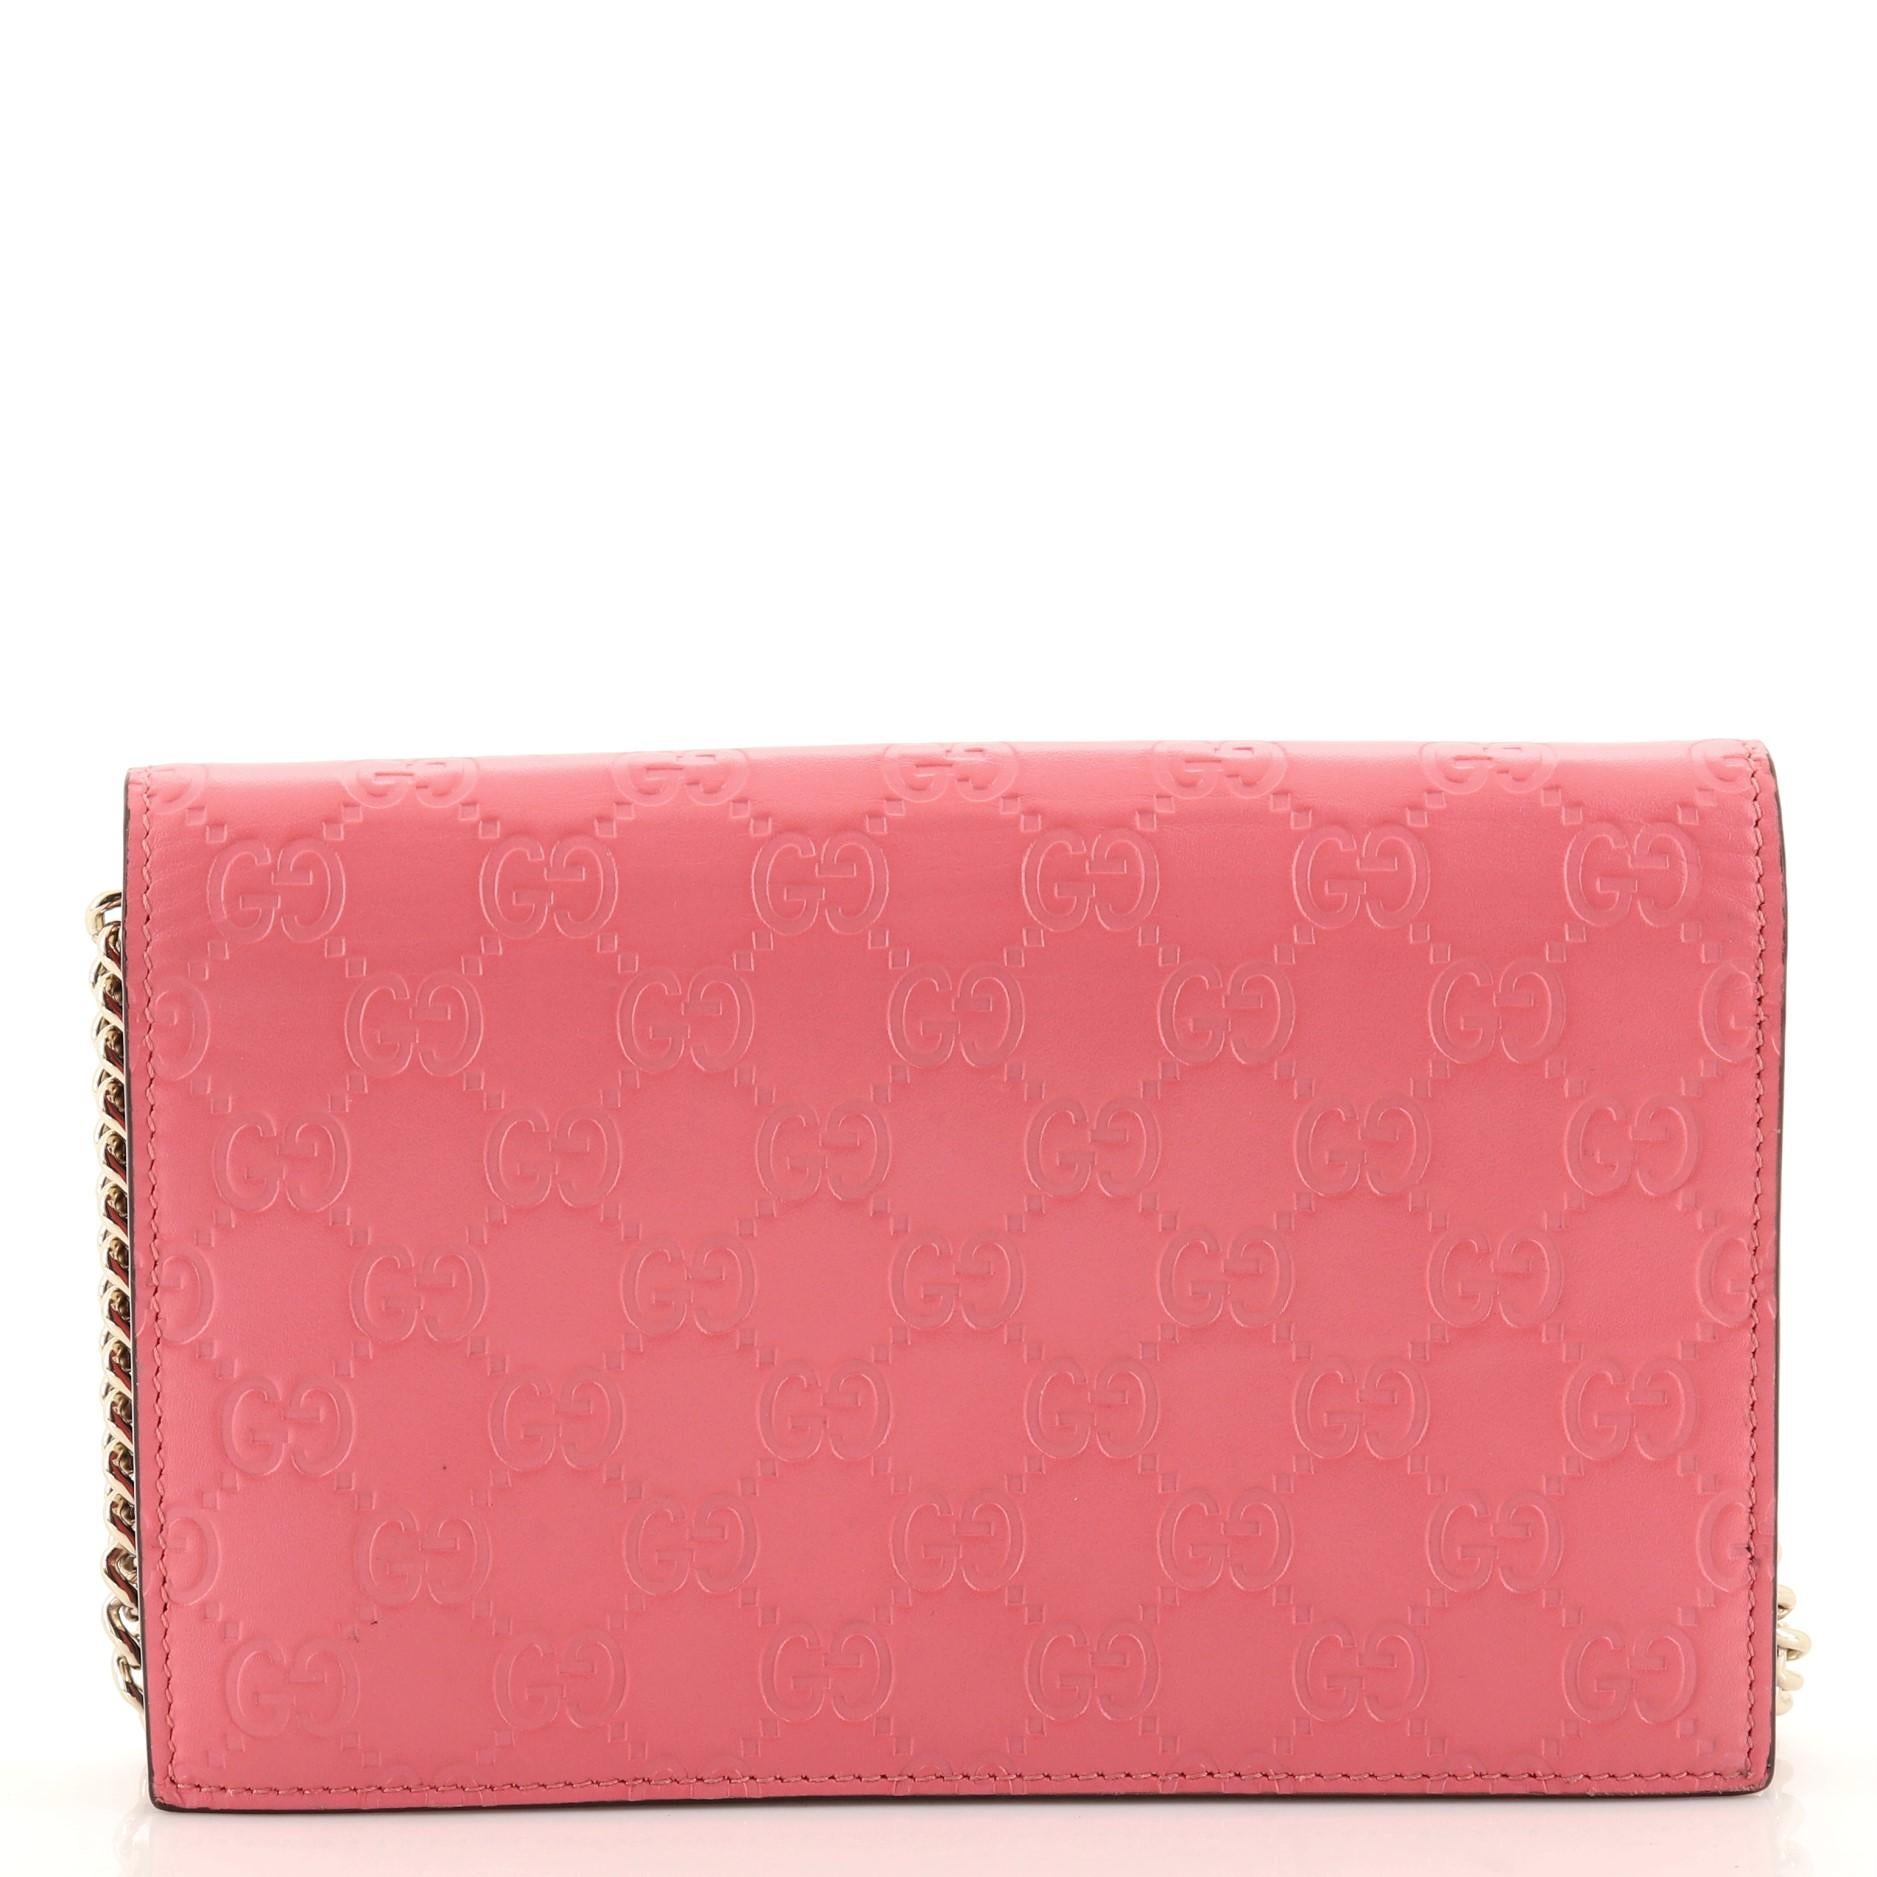 Pink Gucci Signature Wallet on Chain Guccissima Leather